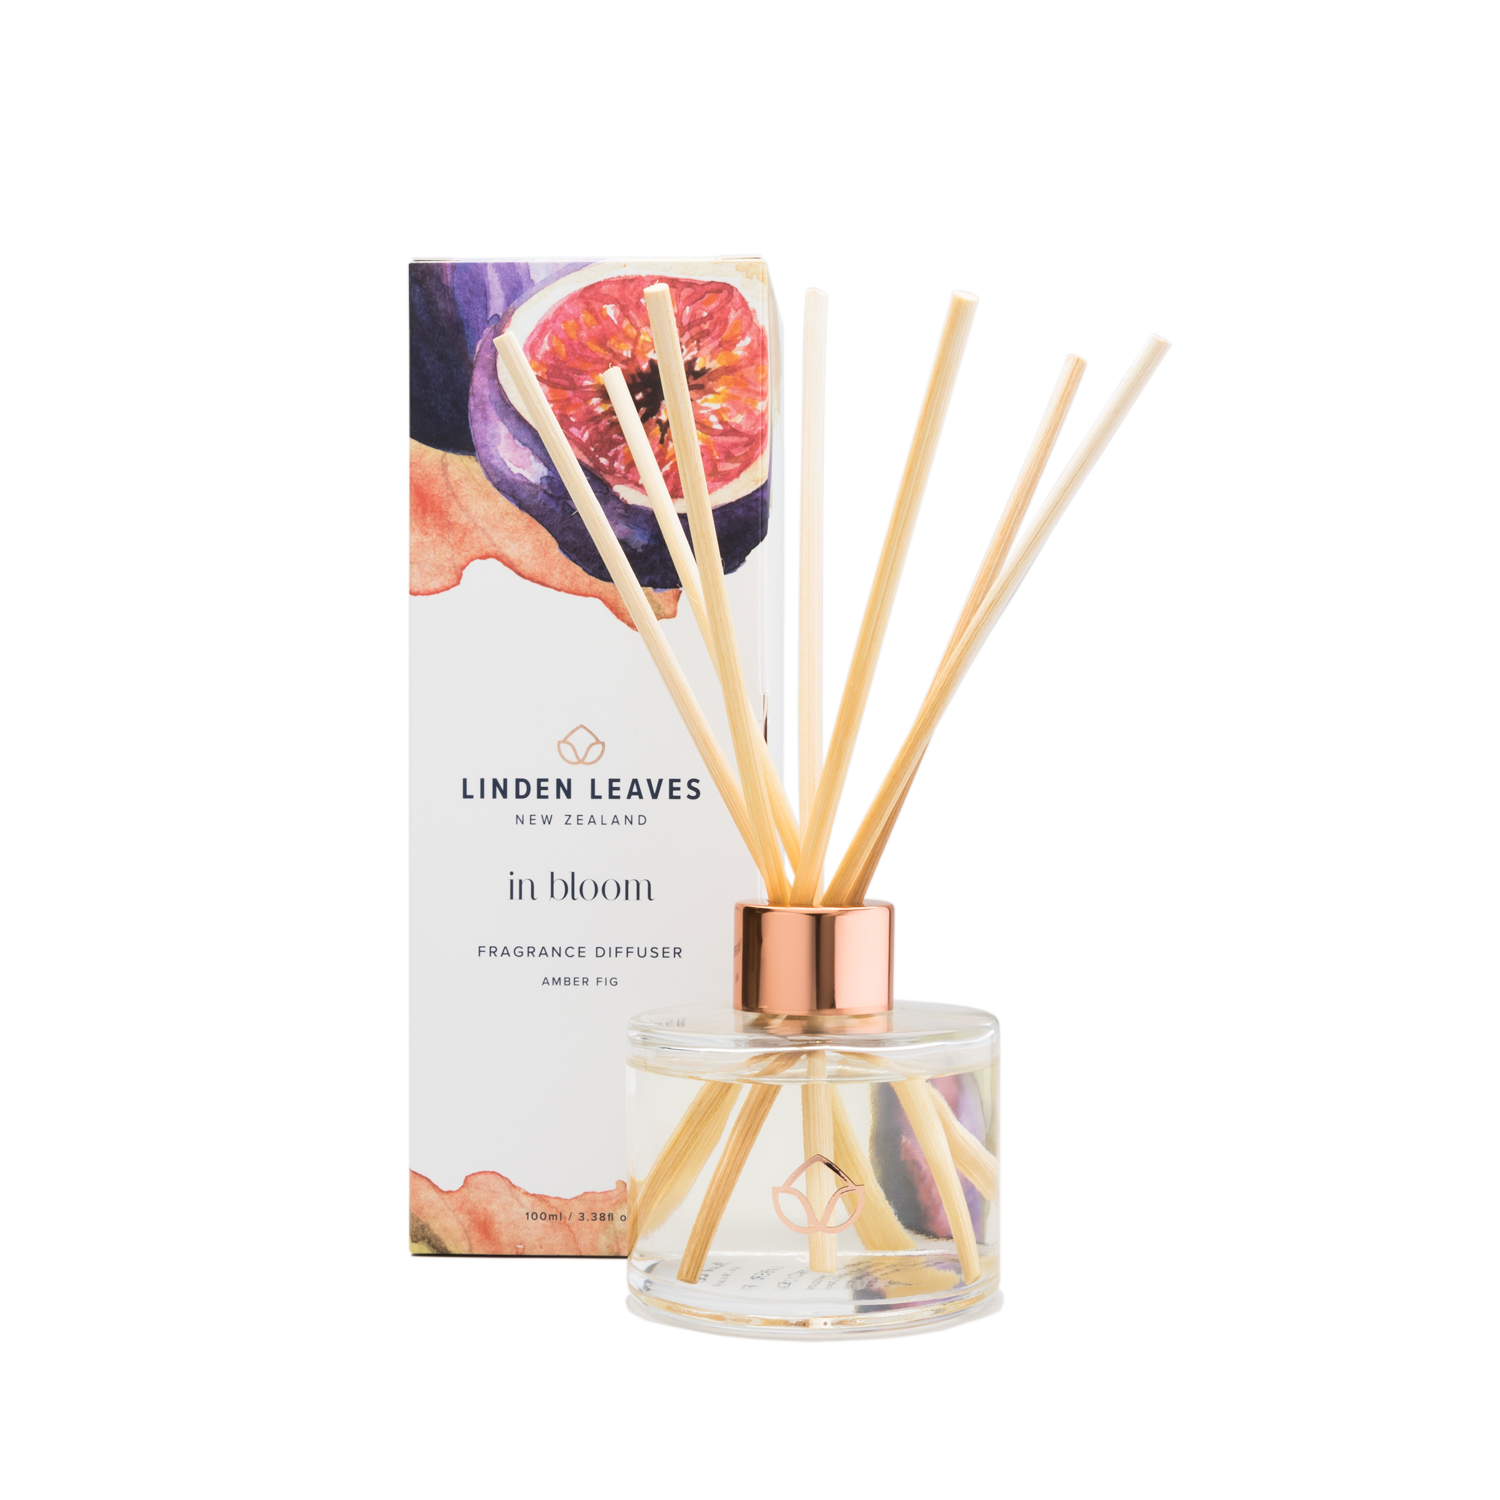 Linden Leaves 琳登丽诗 in bloom 绽放系列 fragrance diffuser - 香薰 amber fig 琥珀红心果 100ml